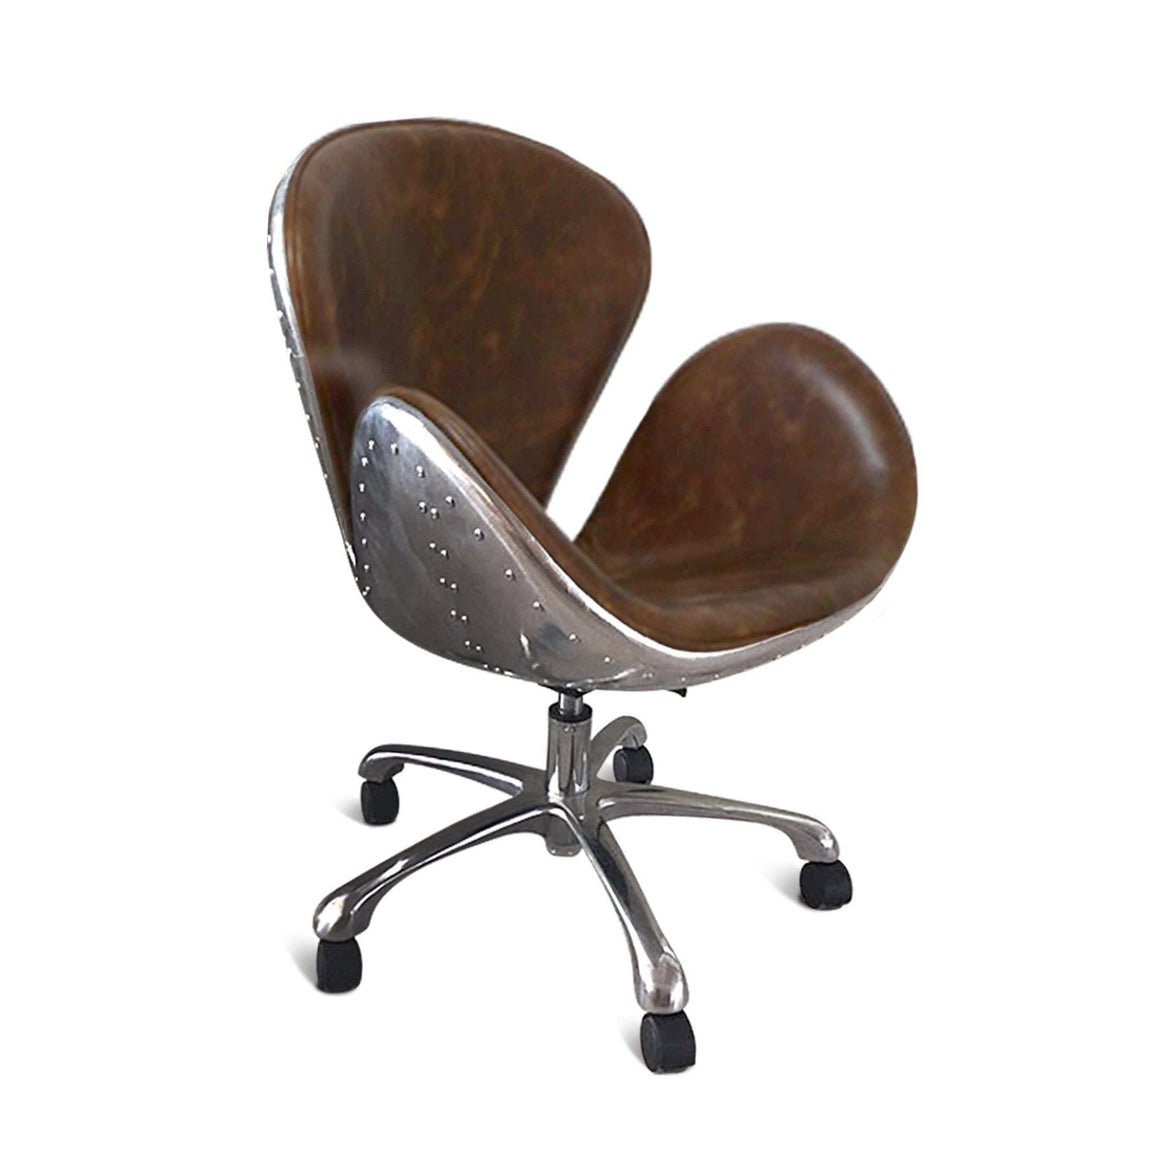 Aviator Office Swan Chair - Casters - Genuine Leather - Polished Aluminum - Rustic Deco Incorporated